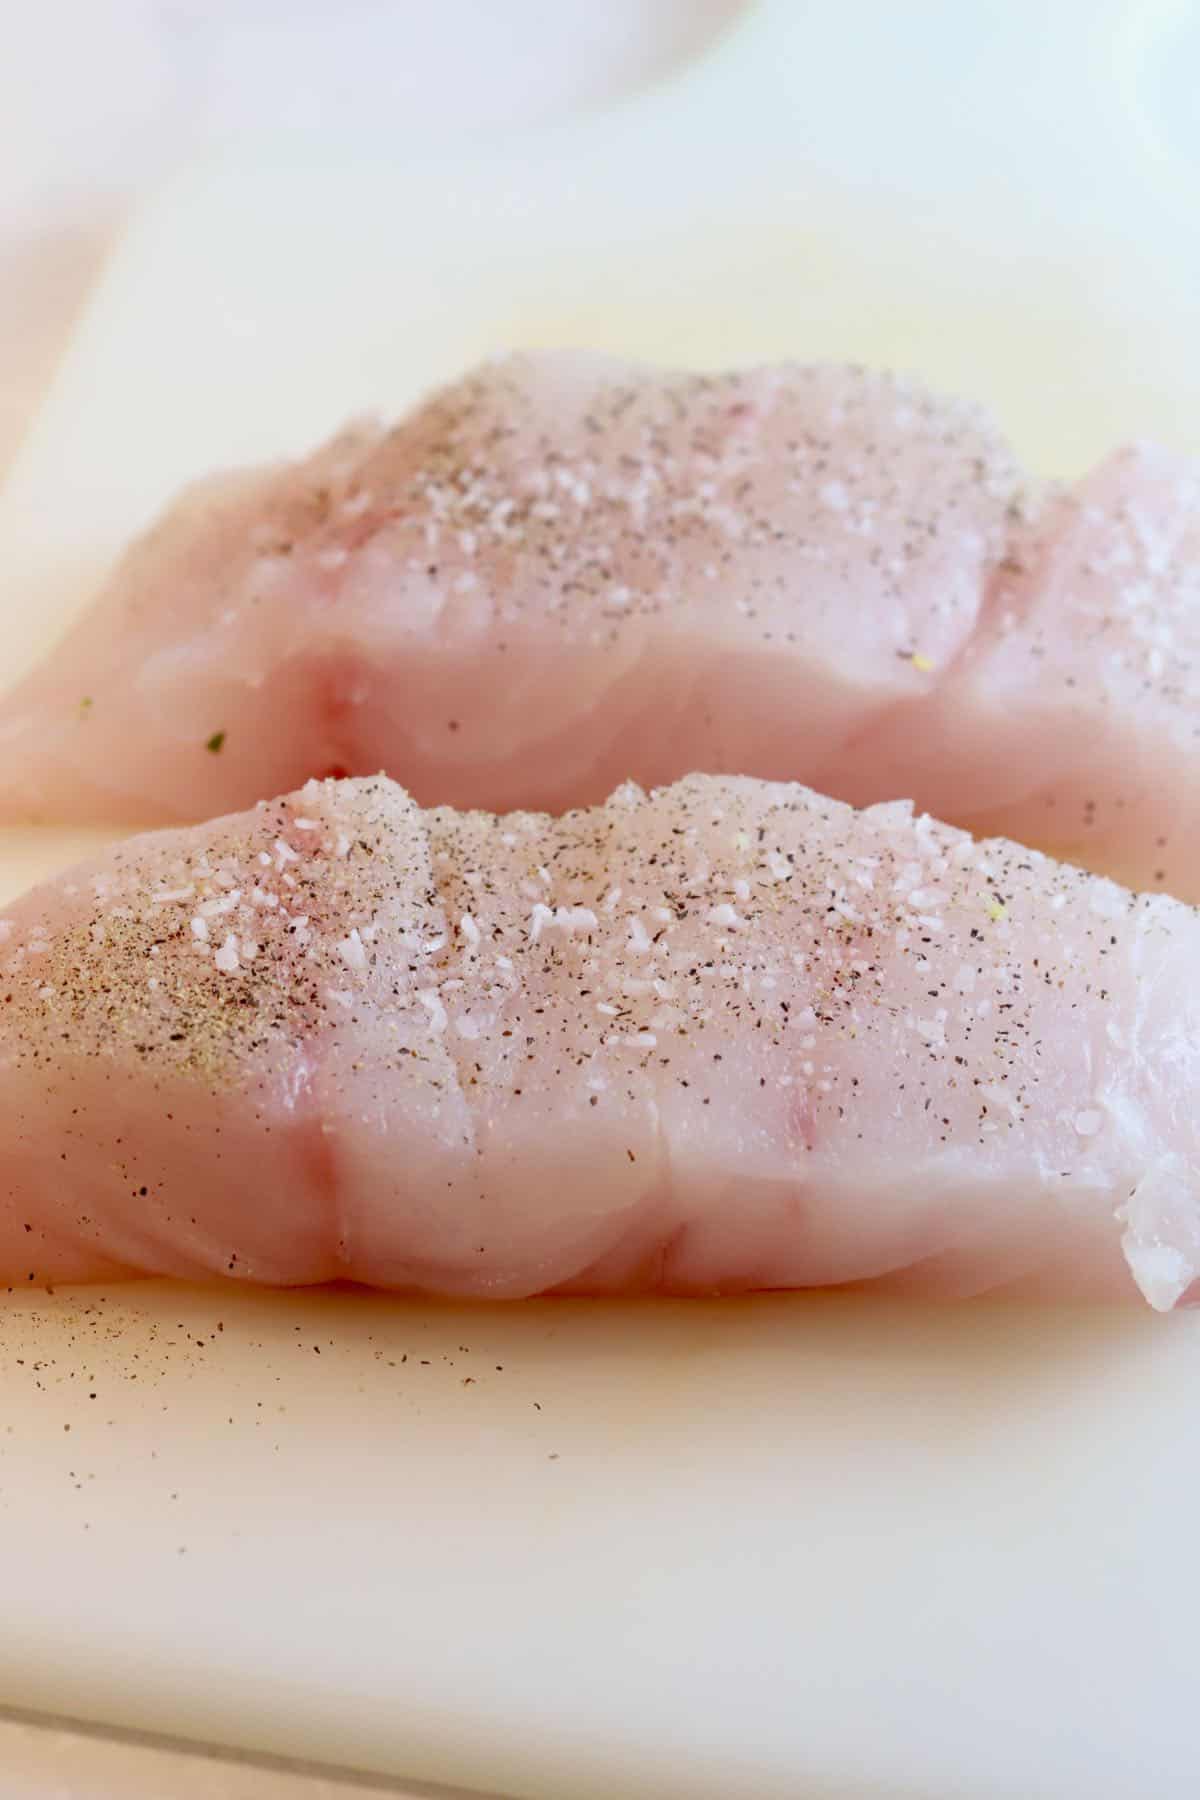 Two fish fillets seasoned with salt and pepper.